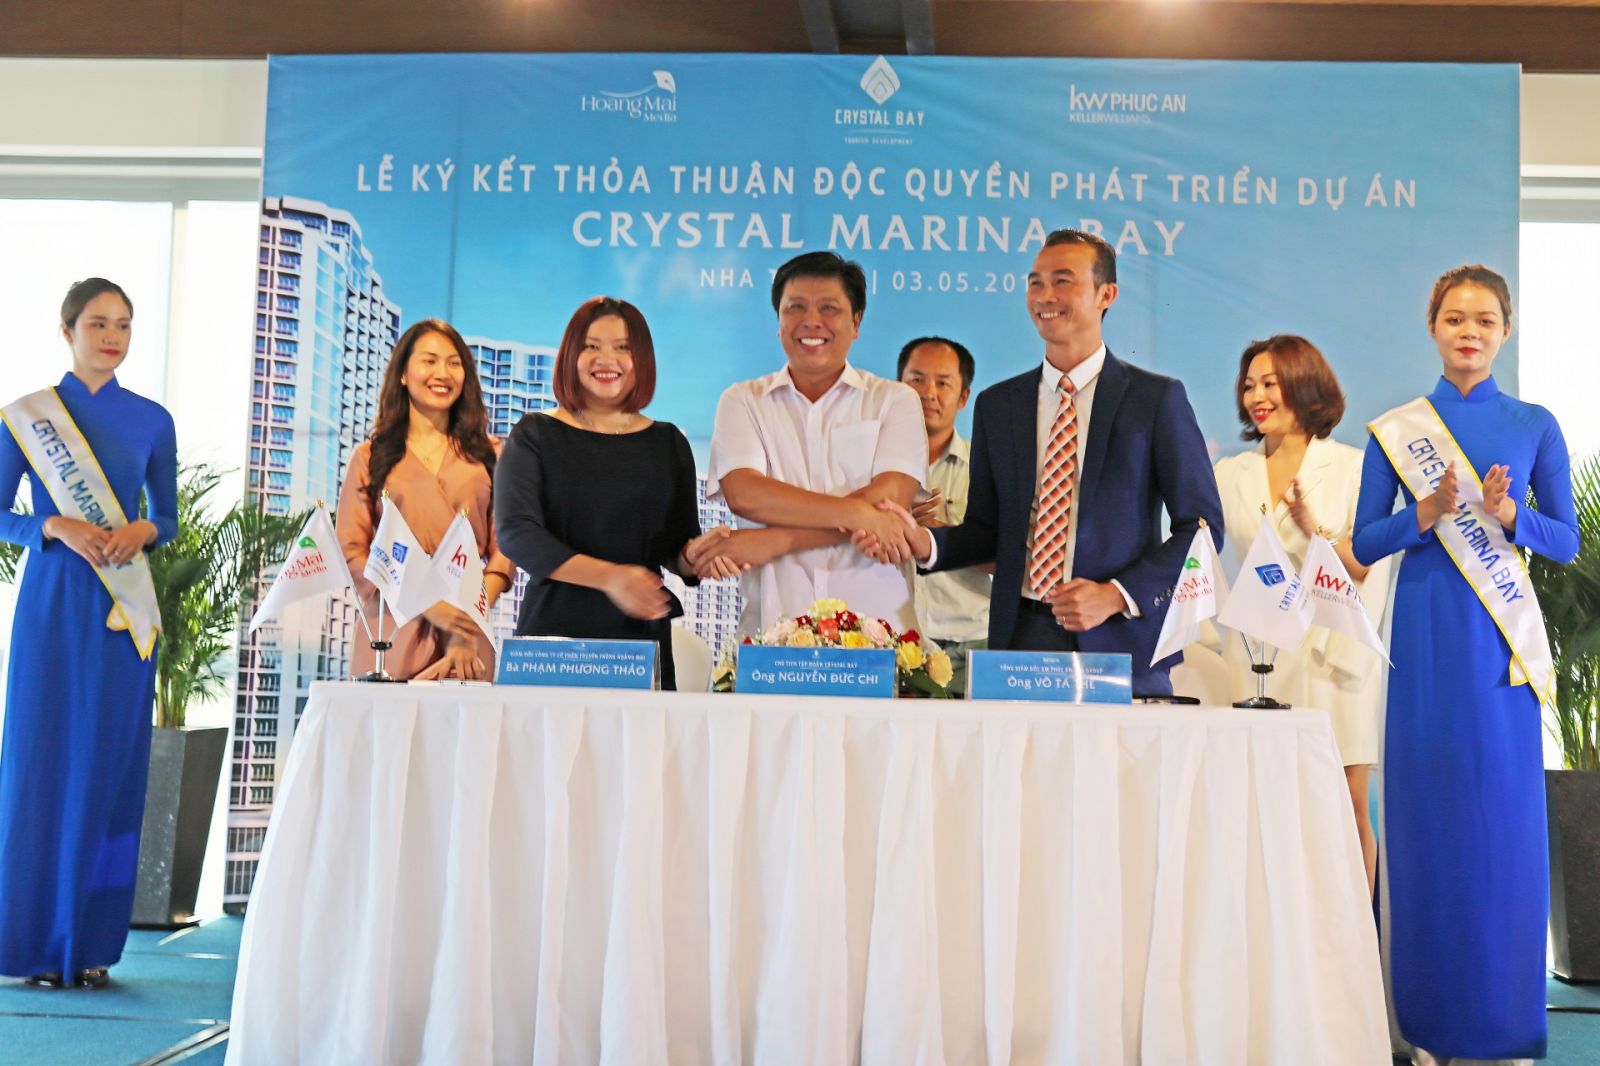 The exclusive signing ceremony of Crystal Marina Bay project development between Crystal Bay Group and KW Phuc An and Hoang Mai Media.